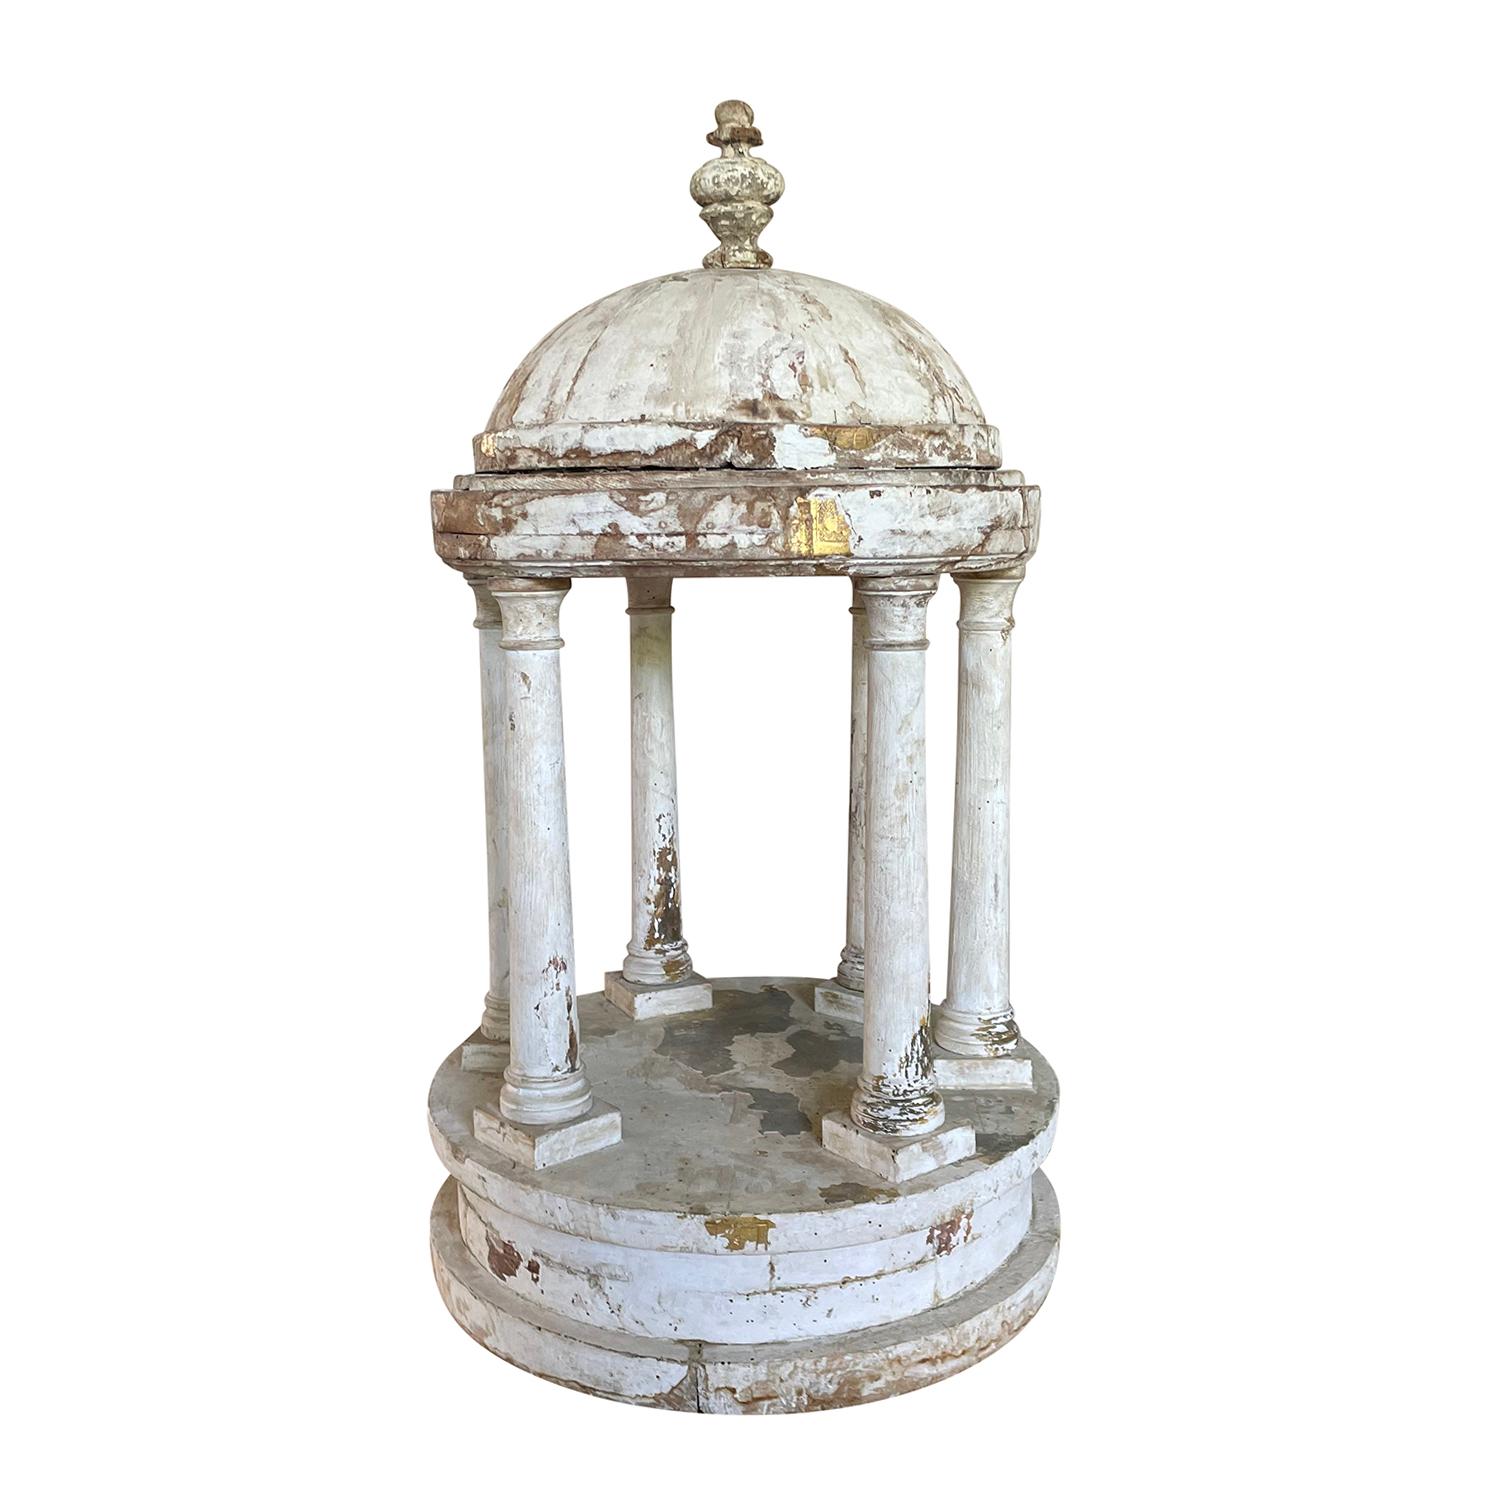 A 19th century, White-grey antique miniature model of a Palladio style gazebo with a domed roof and topped with a small urn shaped finial, columns and circular base. The detailed décor piece is made of handcrafted painted Pinewood, original antique